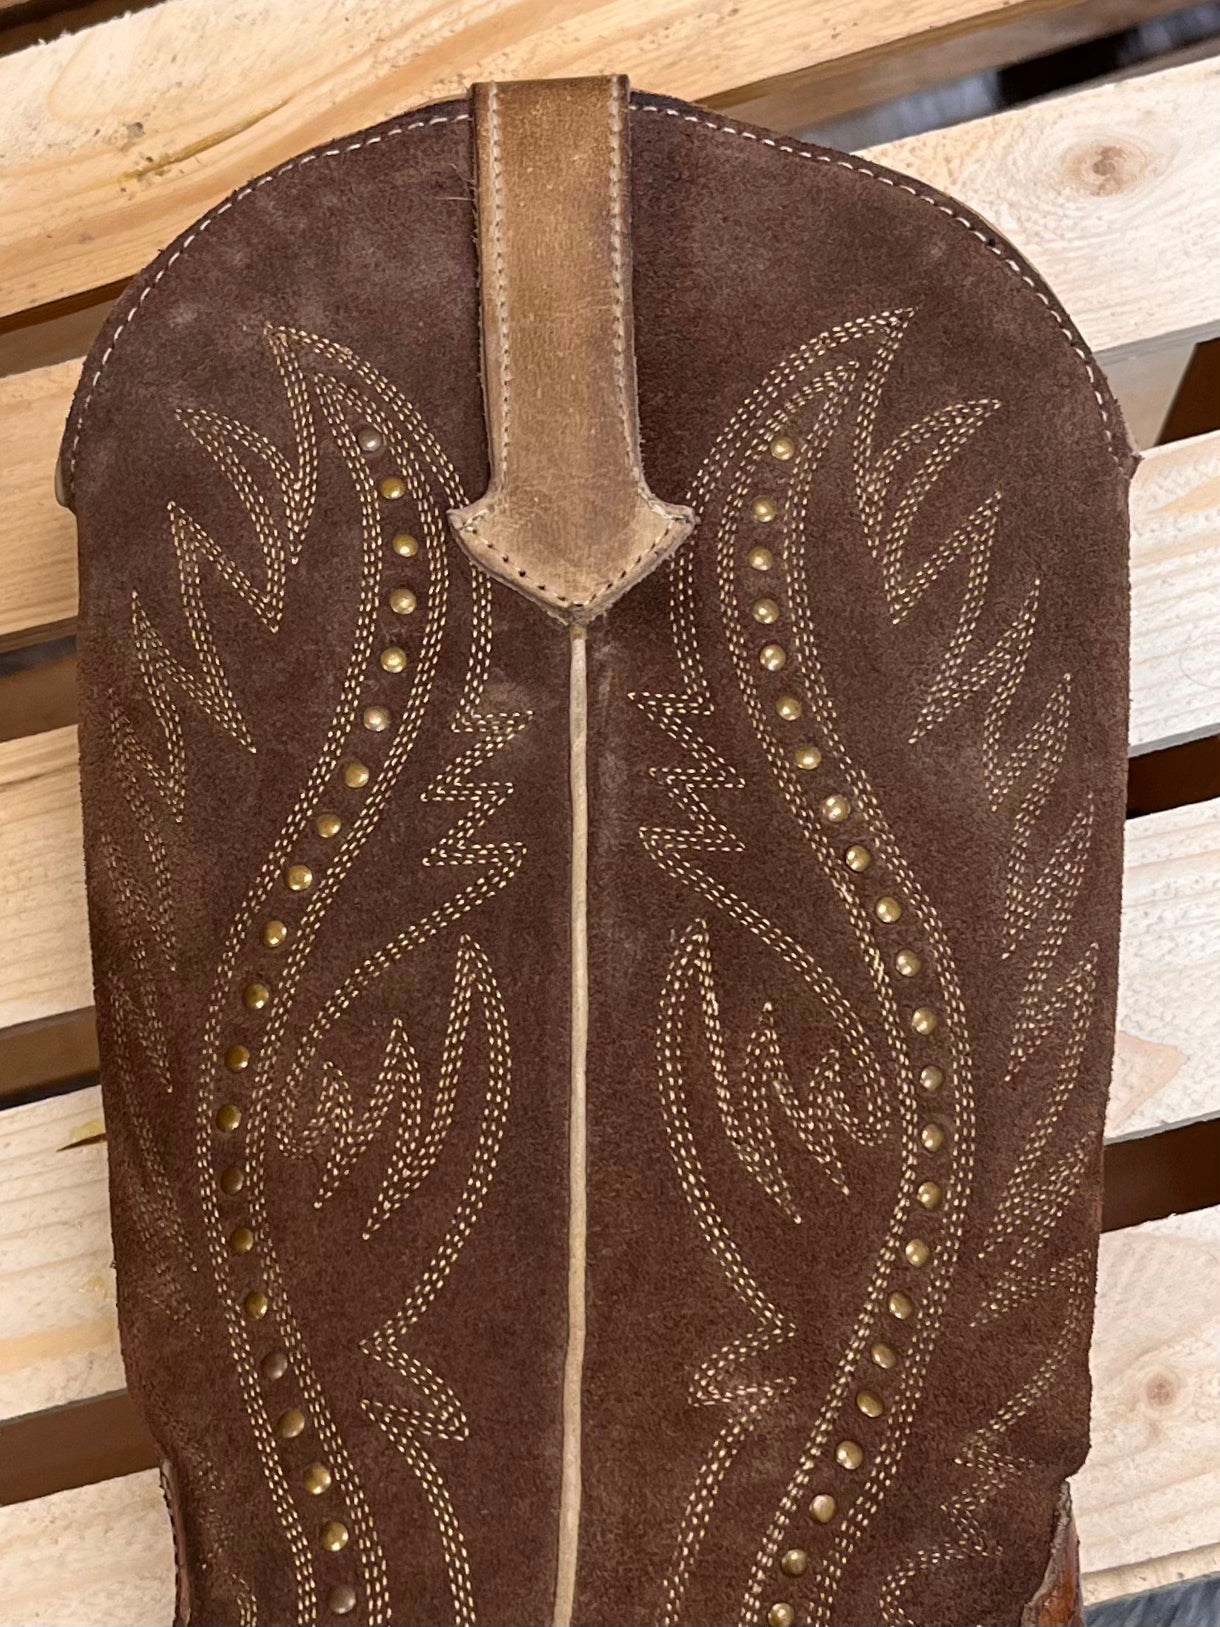 Flaquito Leather — Custom Hand Tooled Leather Women's Clutch Wallet. Your  image/design or idea. Ladies roper style.